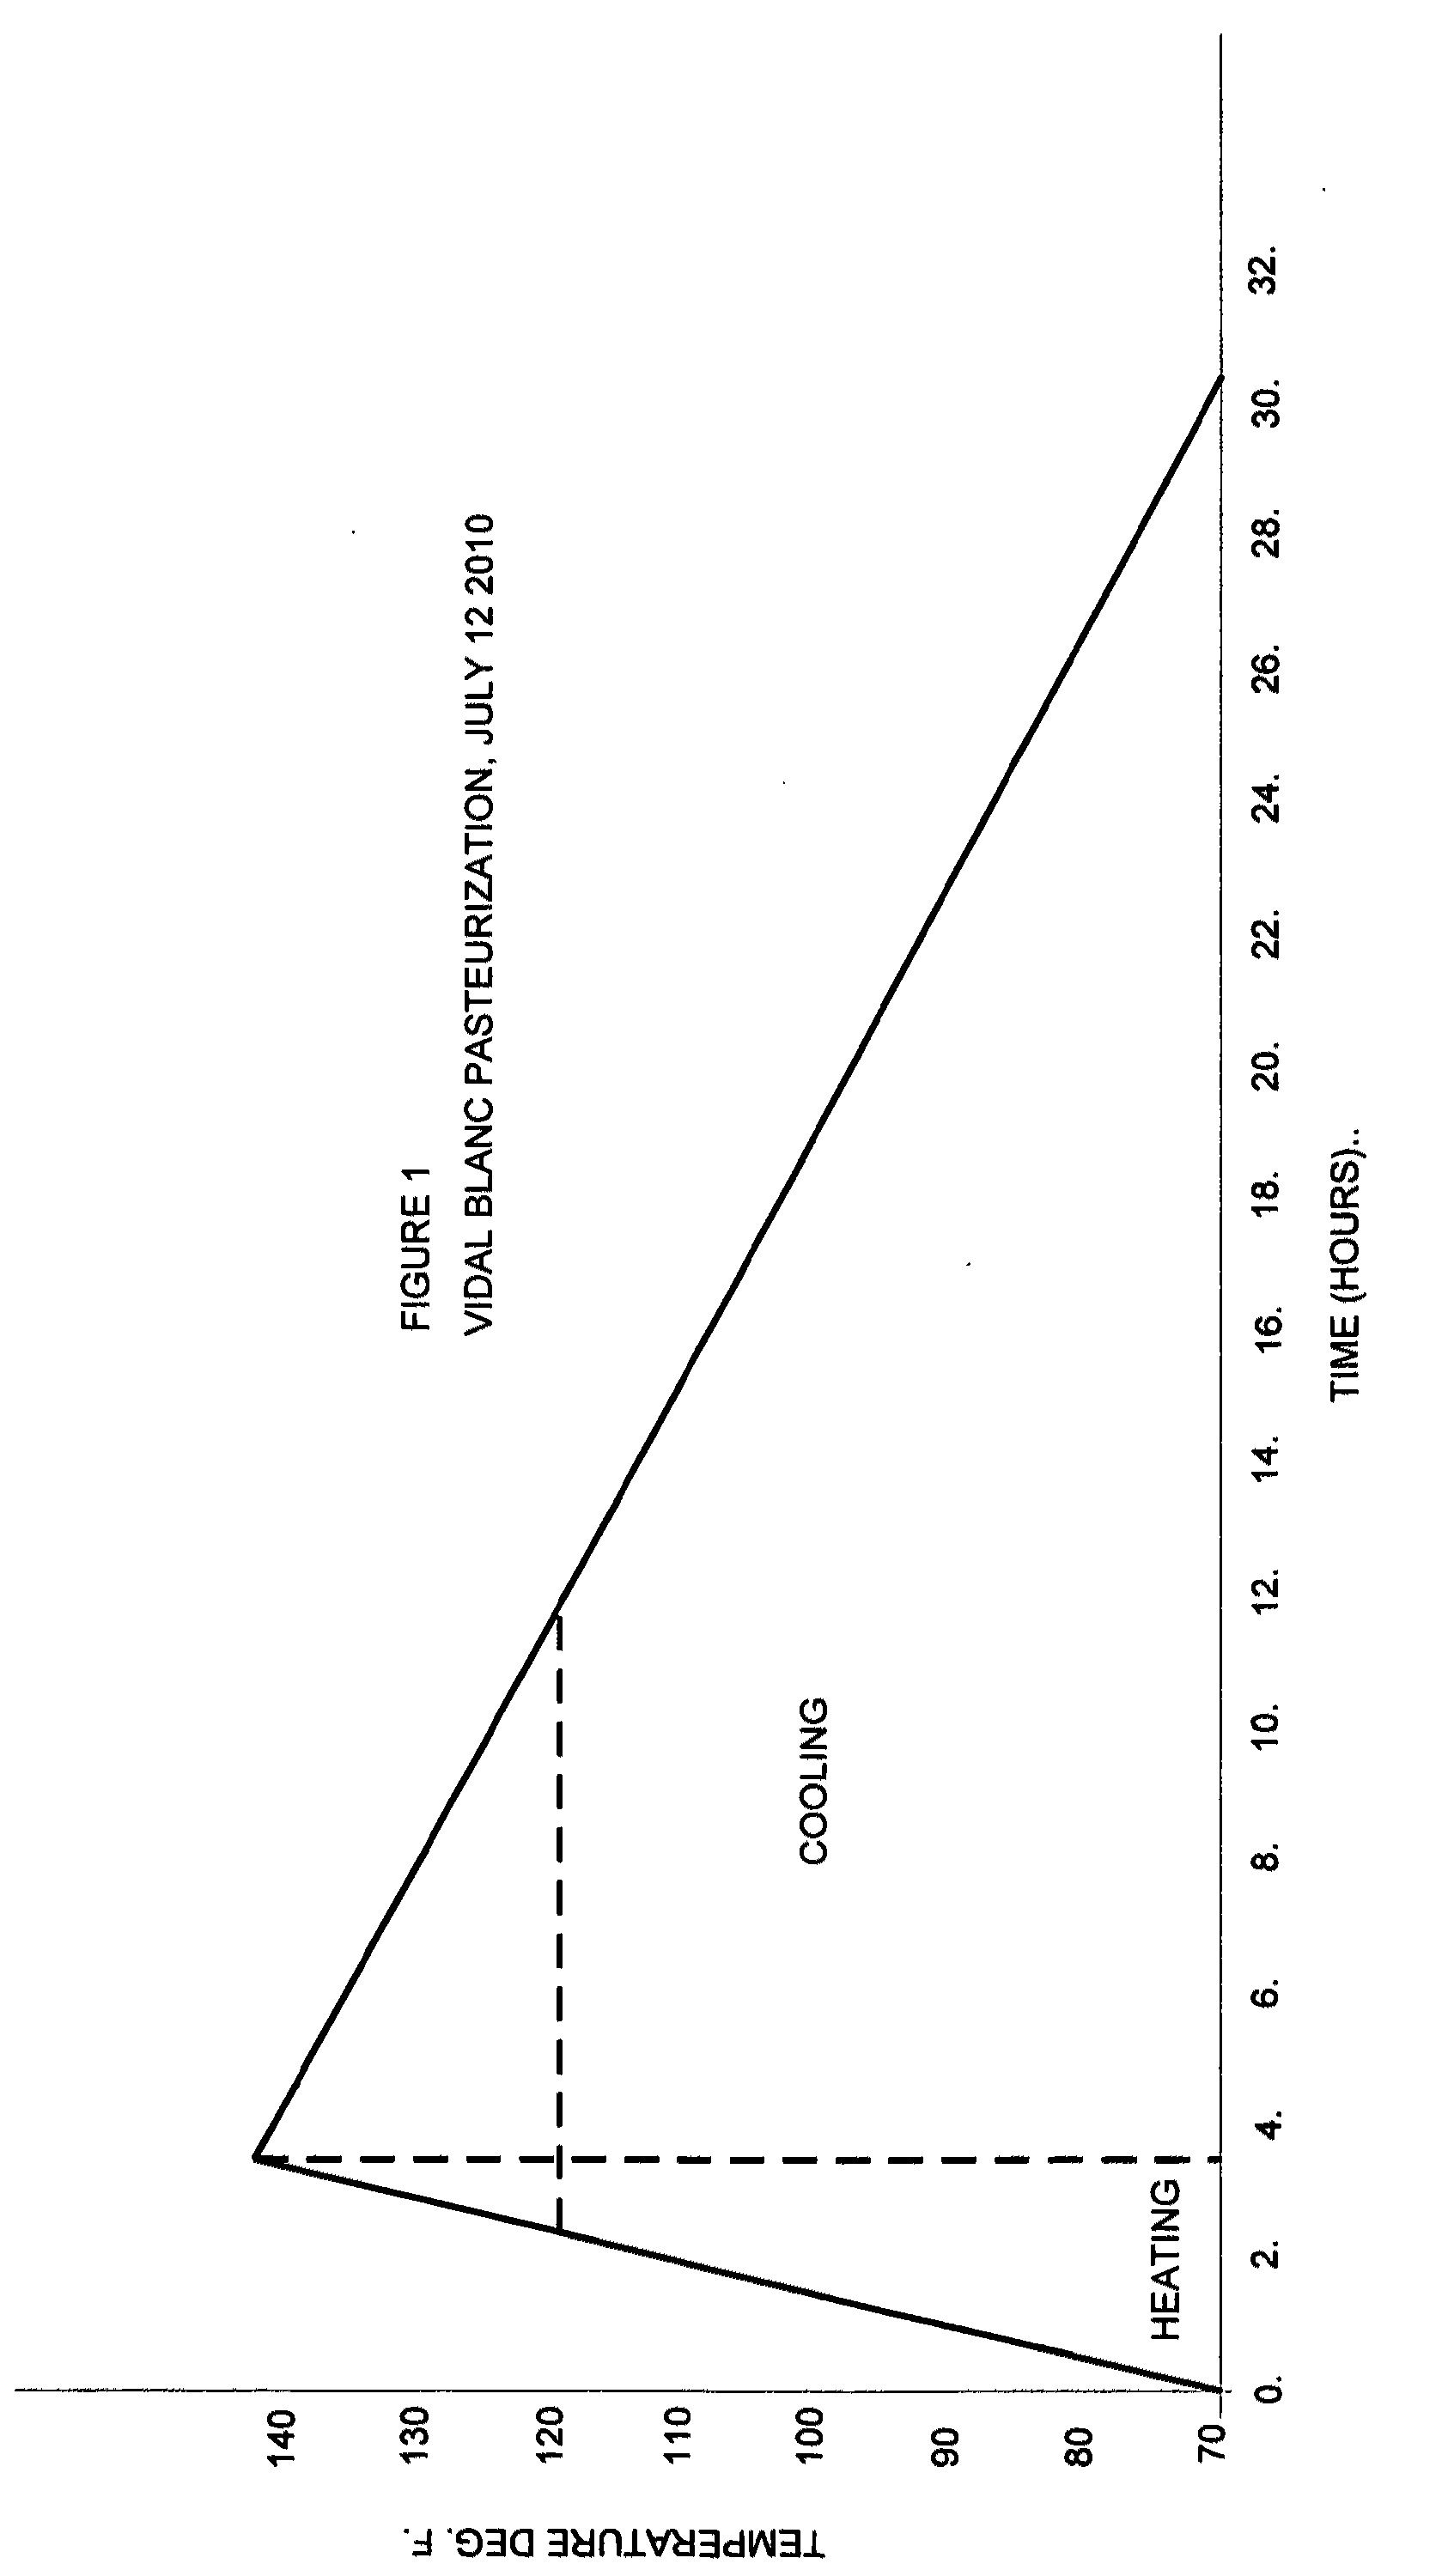 Method for the pasteurization of wine on a production basis in the winery